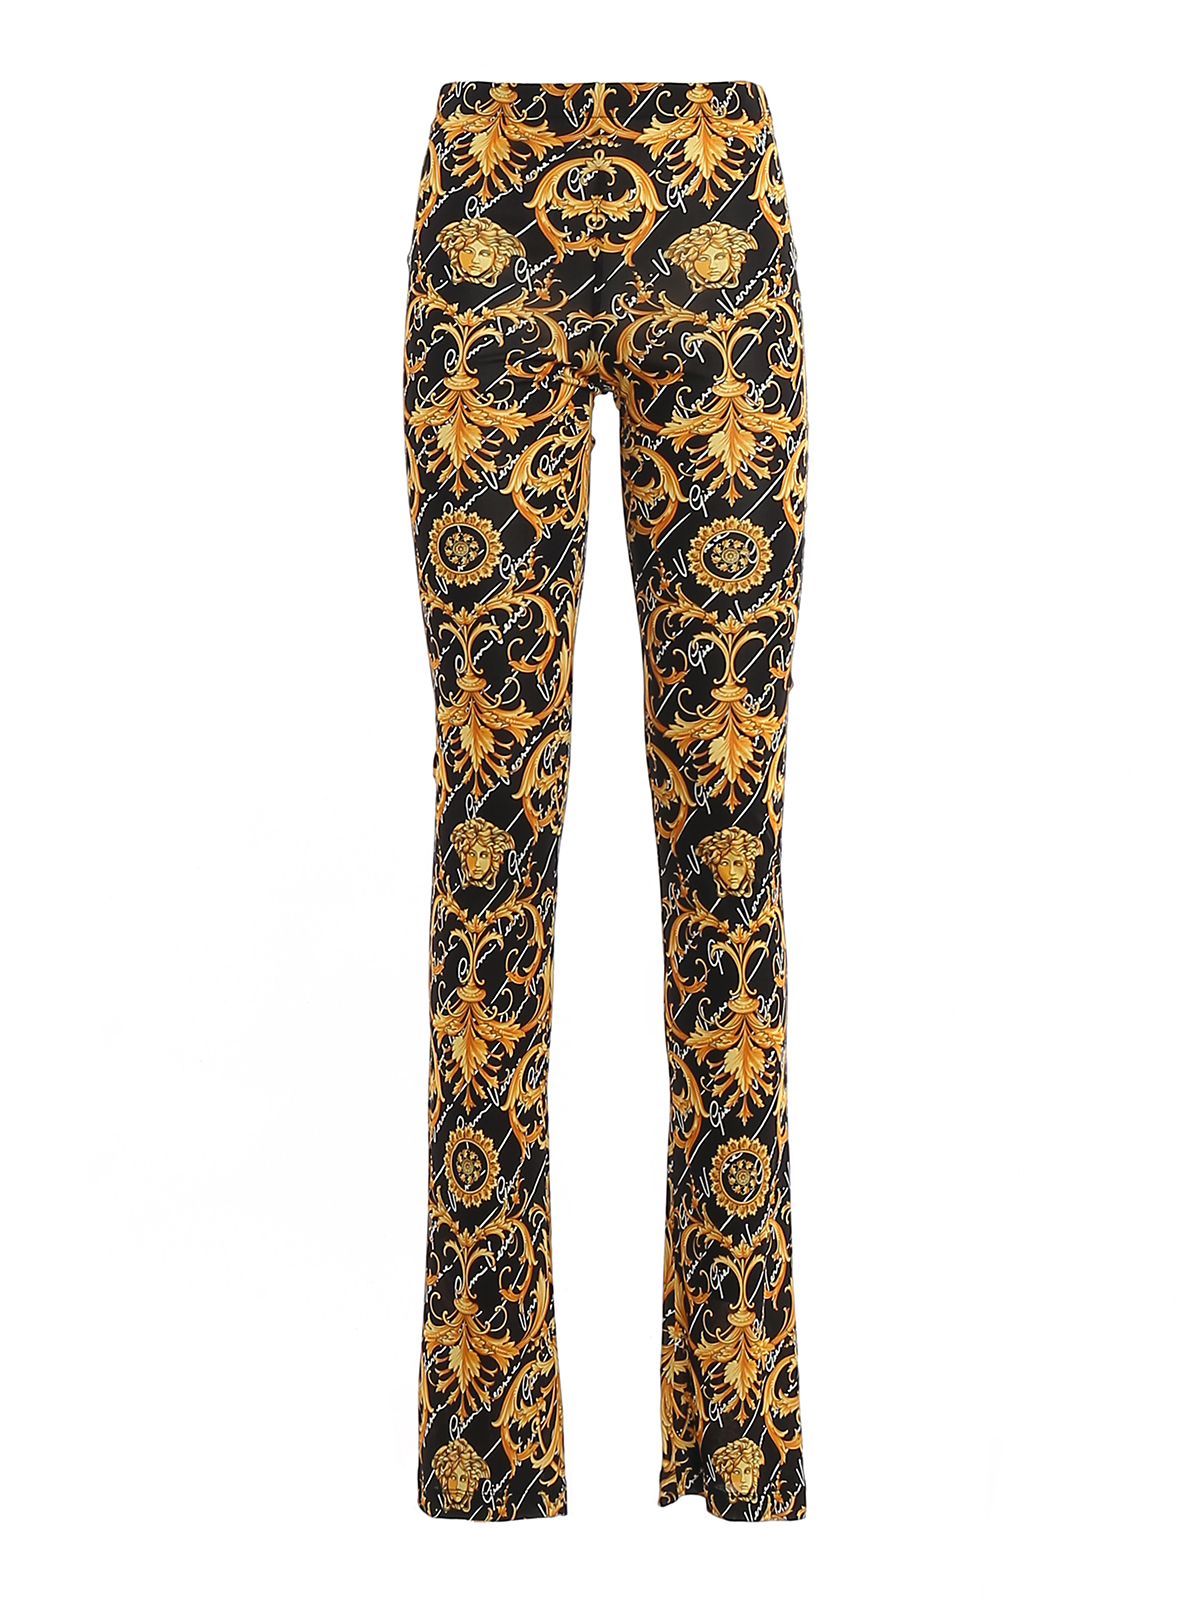 VERSUS Versace Jersey Pants brown-turquoise abstract pattern elegant Fashion Trousers Jersey Pants 